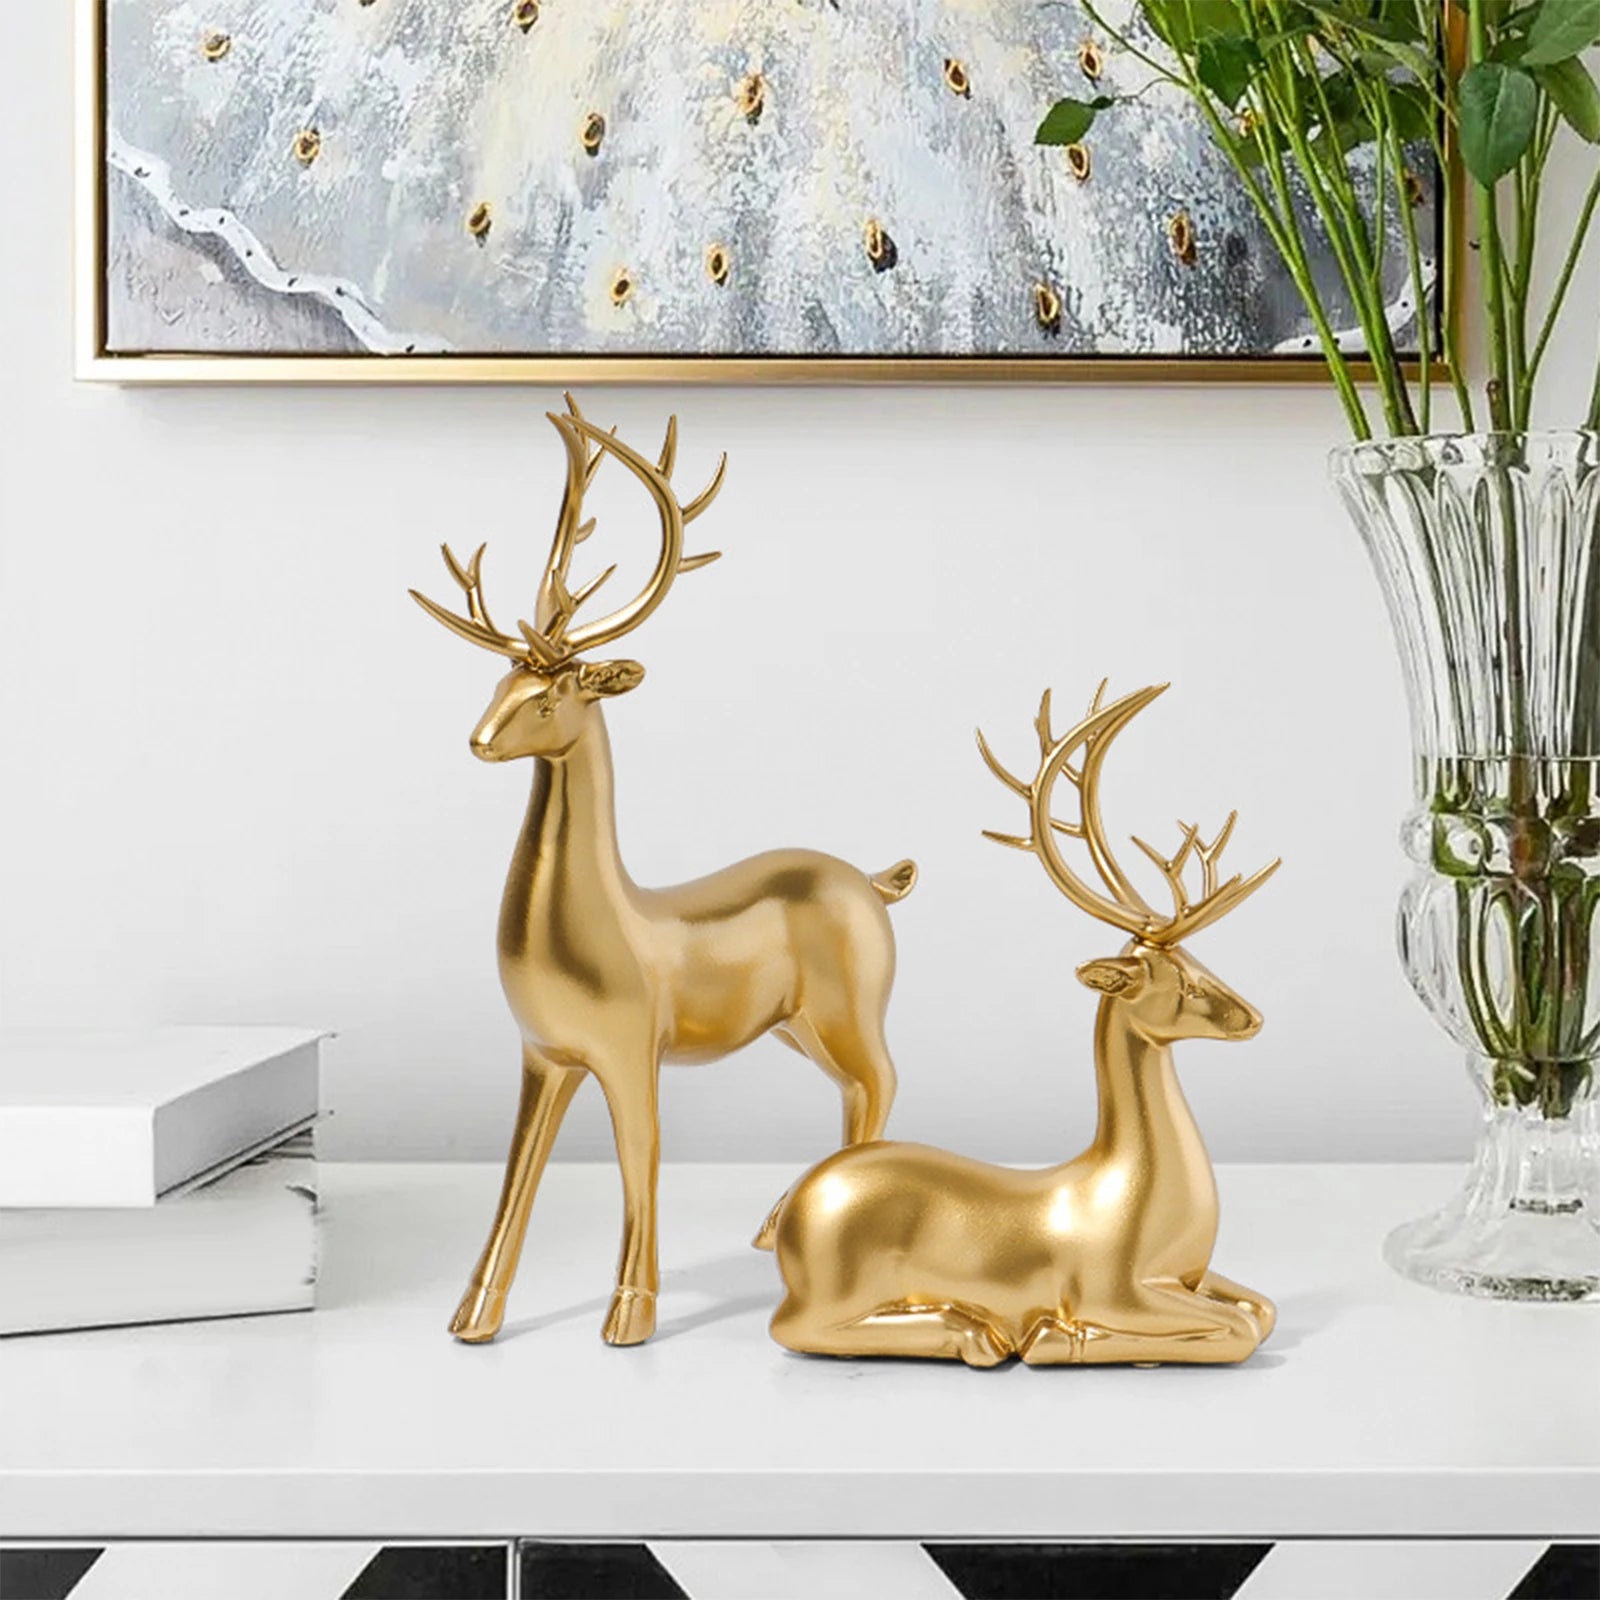 Deer Statue Standing and Sitting Resin Sculpture Reindeer Figurine Ornaments Stag Accents for Home Entrance Mantle Table Decor